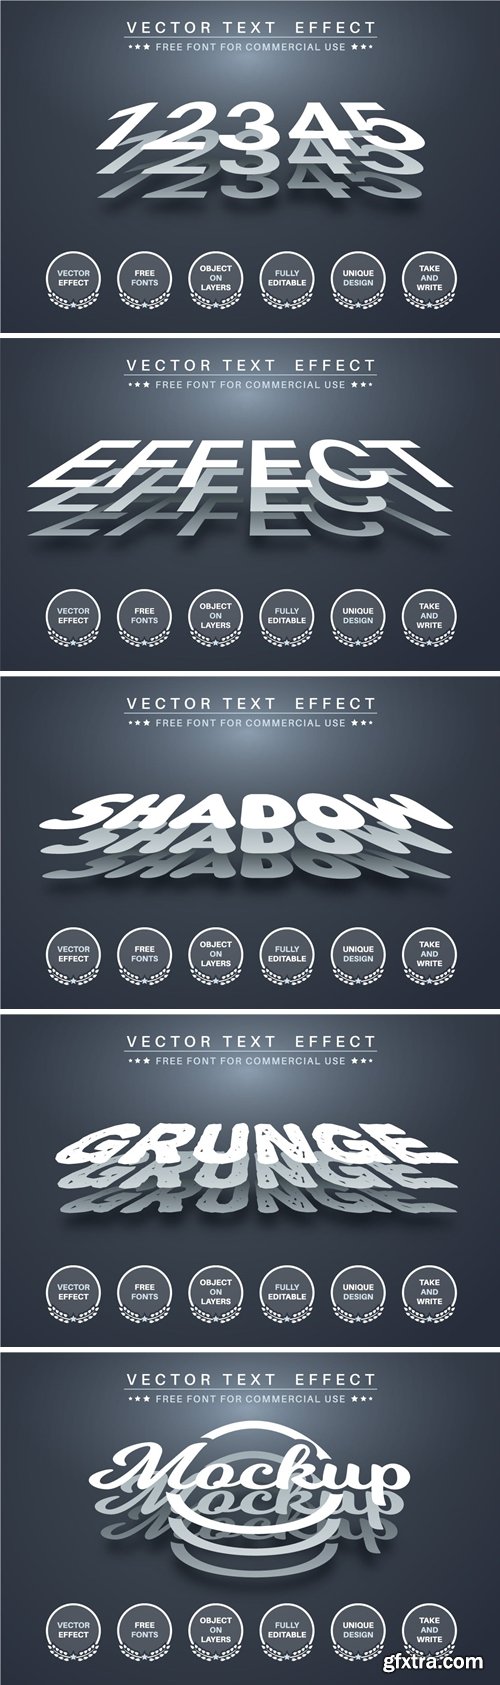 Three layer - editable text effect, font style